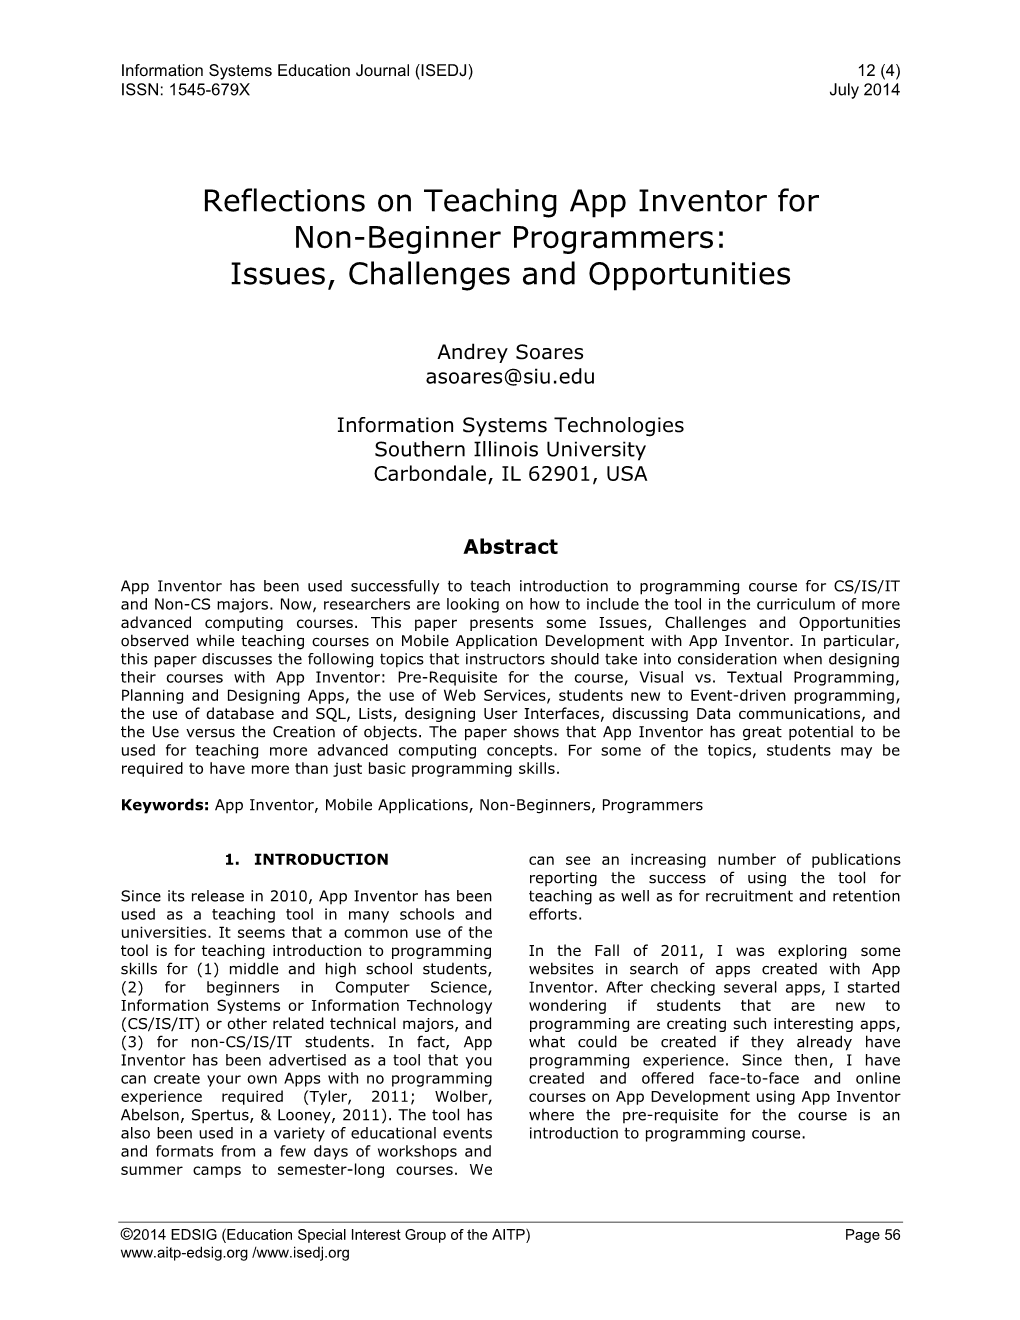 Reflections on Teaching App Inventor for Non-Beginner Programmers: Issues, Challenges and Opportunities